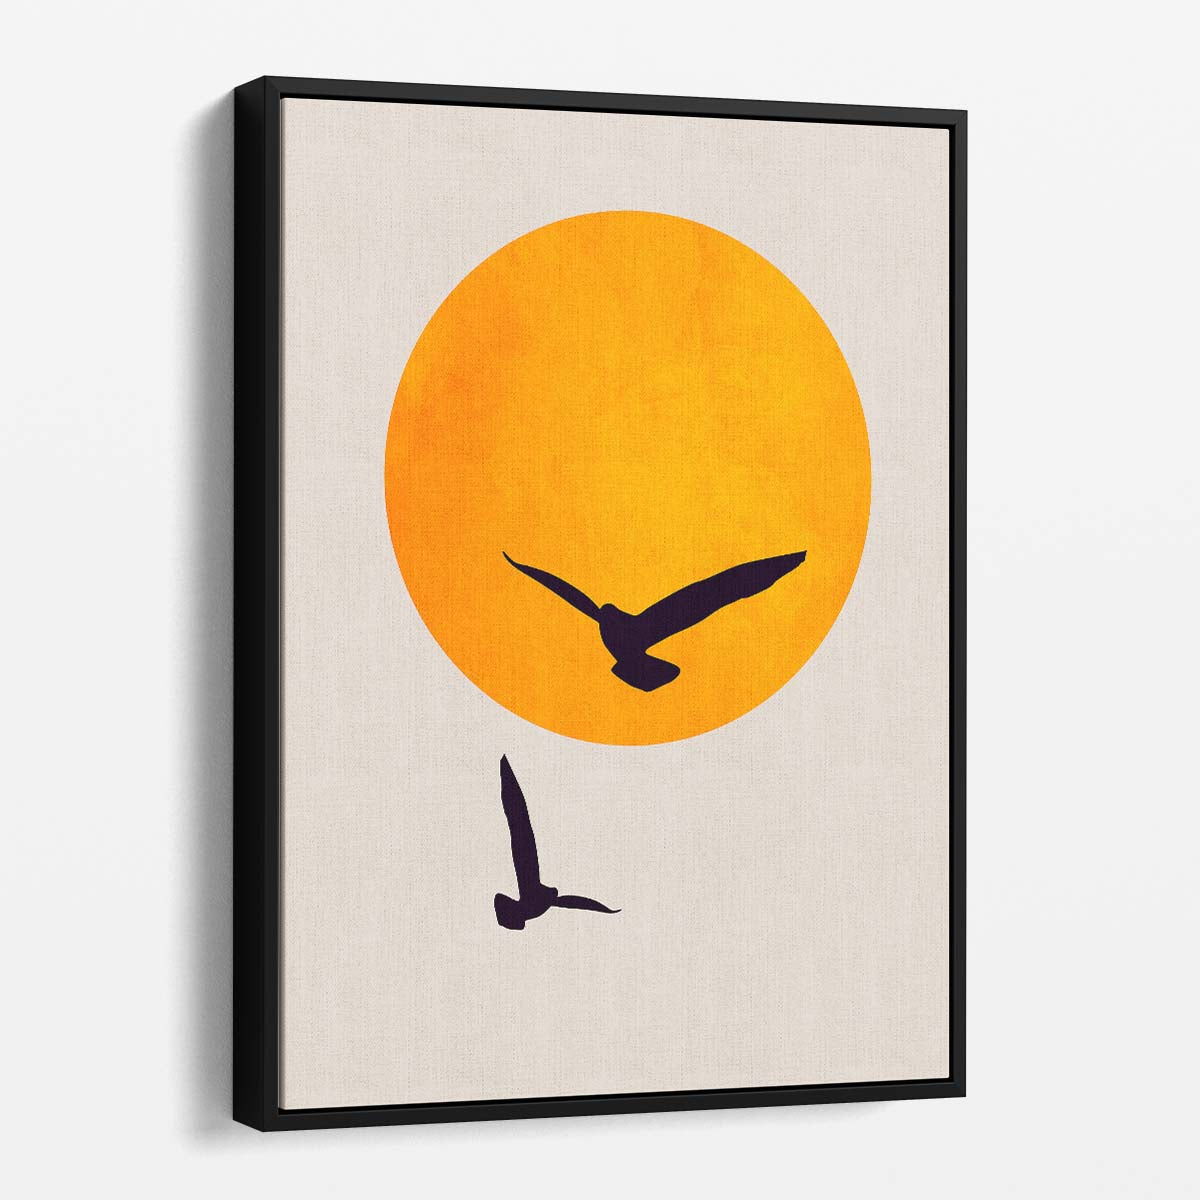 Bright Animal Illustration Kubistika's Birds in Sky on White by Luxuriance Designs, made in USA